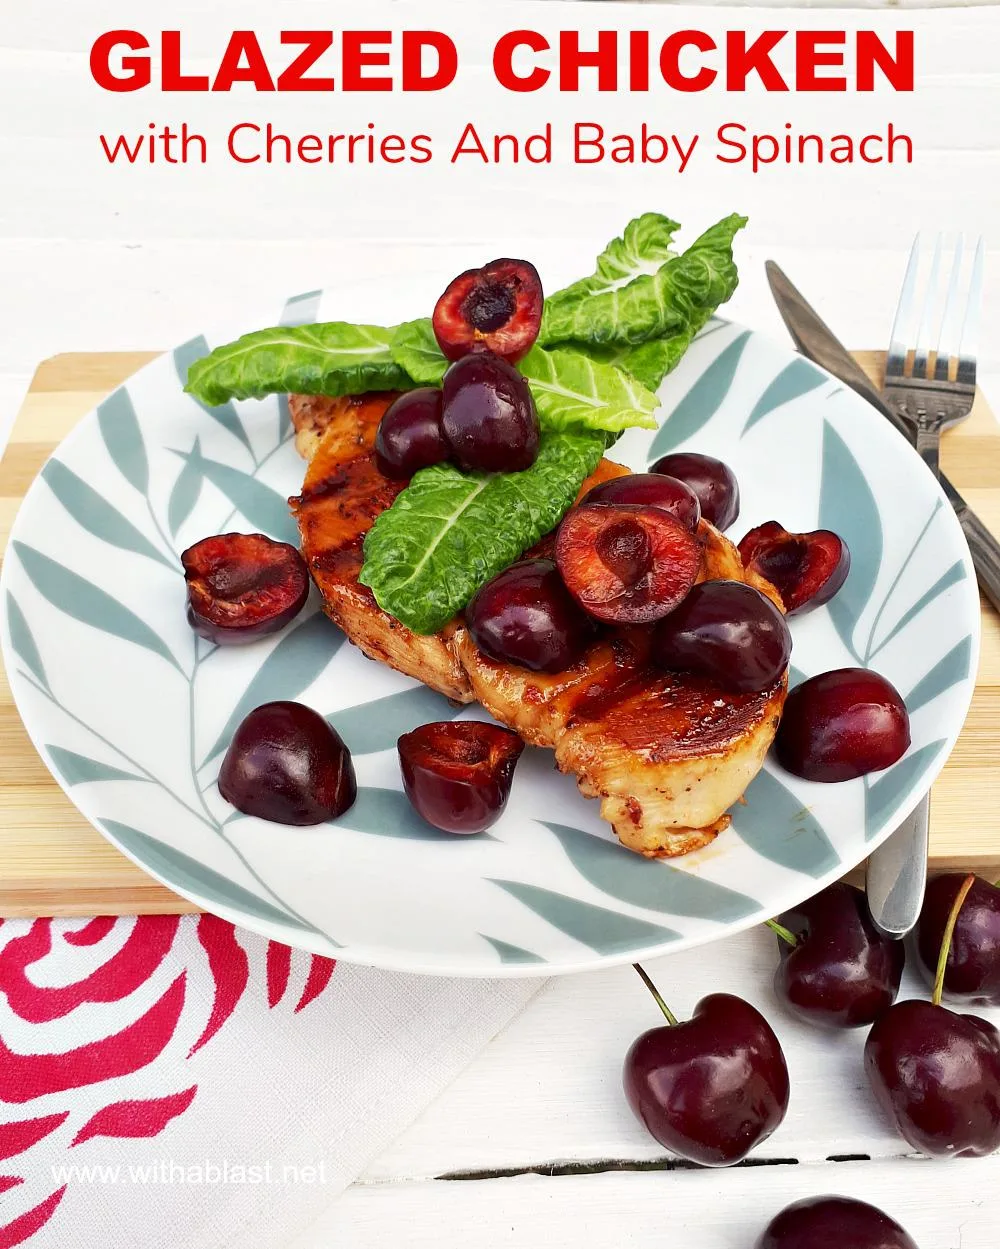 Glazed Chicken With Cherries And Baby Spinach 